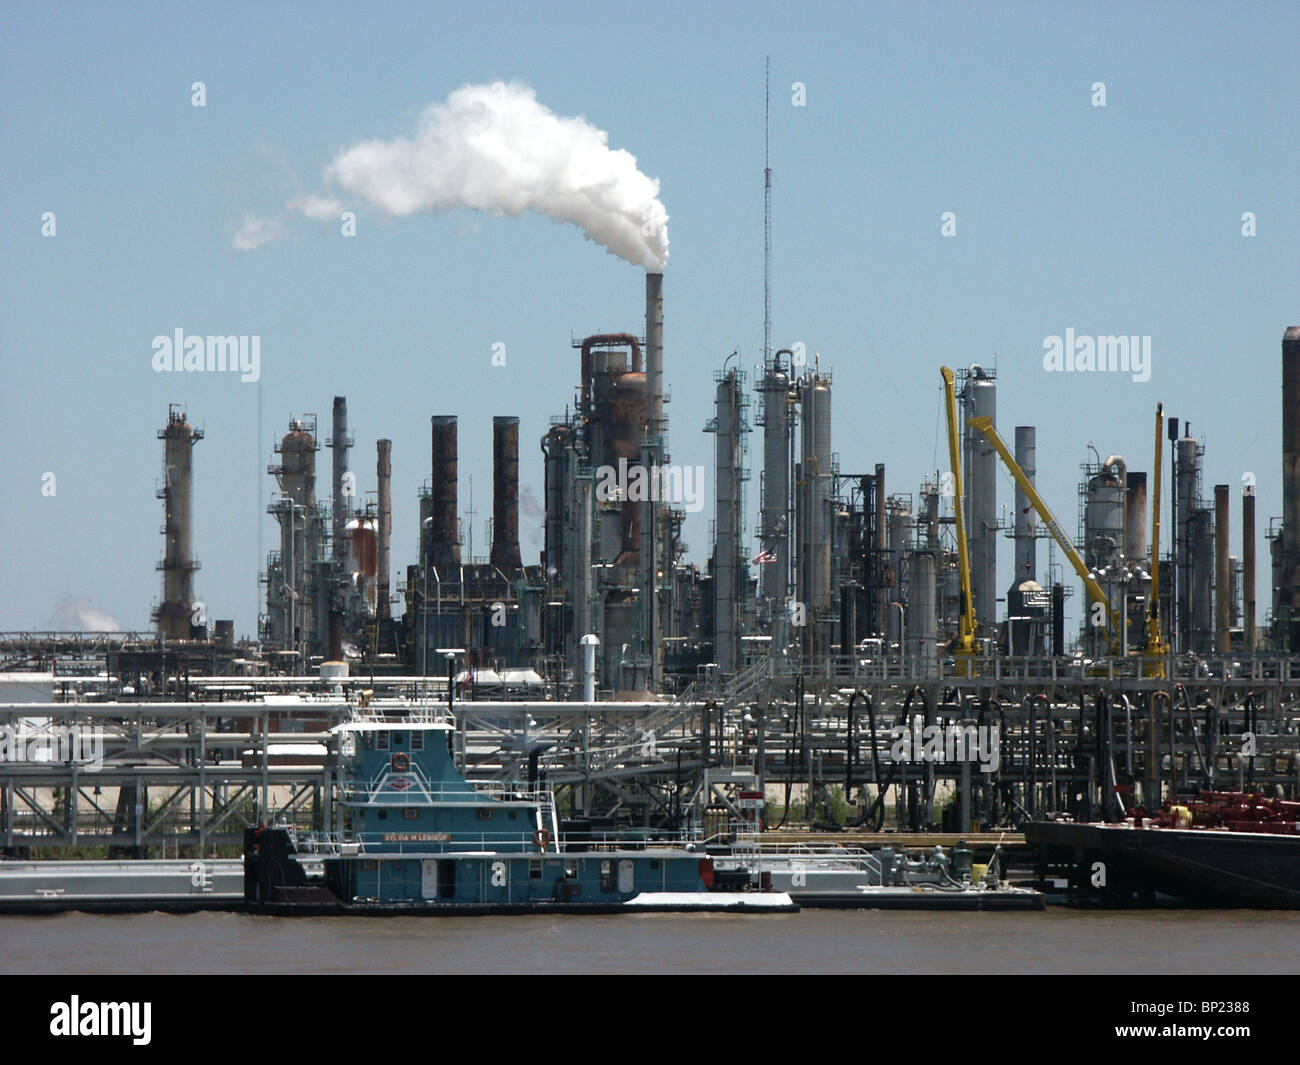 mississippi-delta-oil-refineries-downstream-of-new-orleans-seen-in